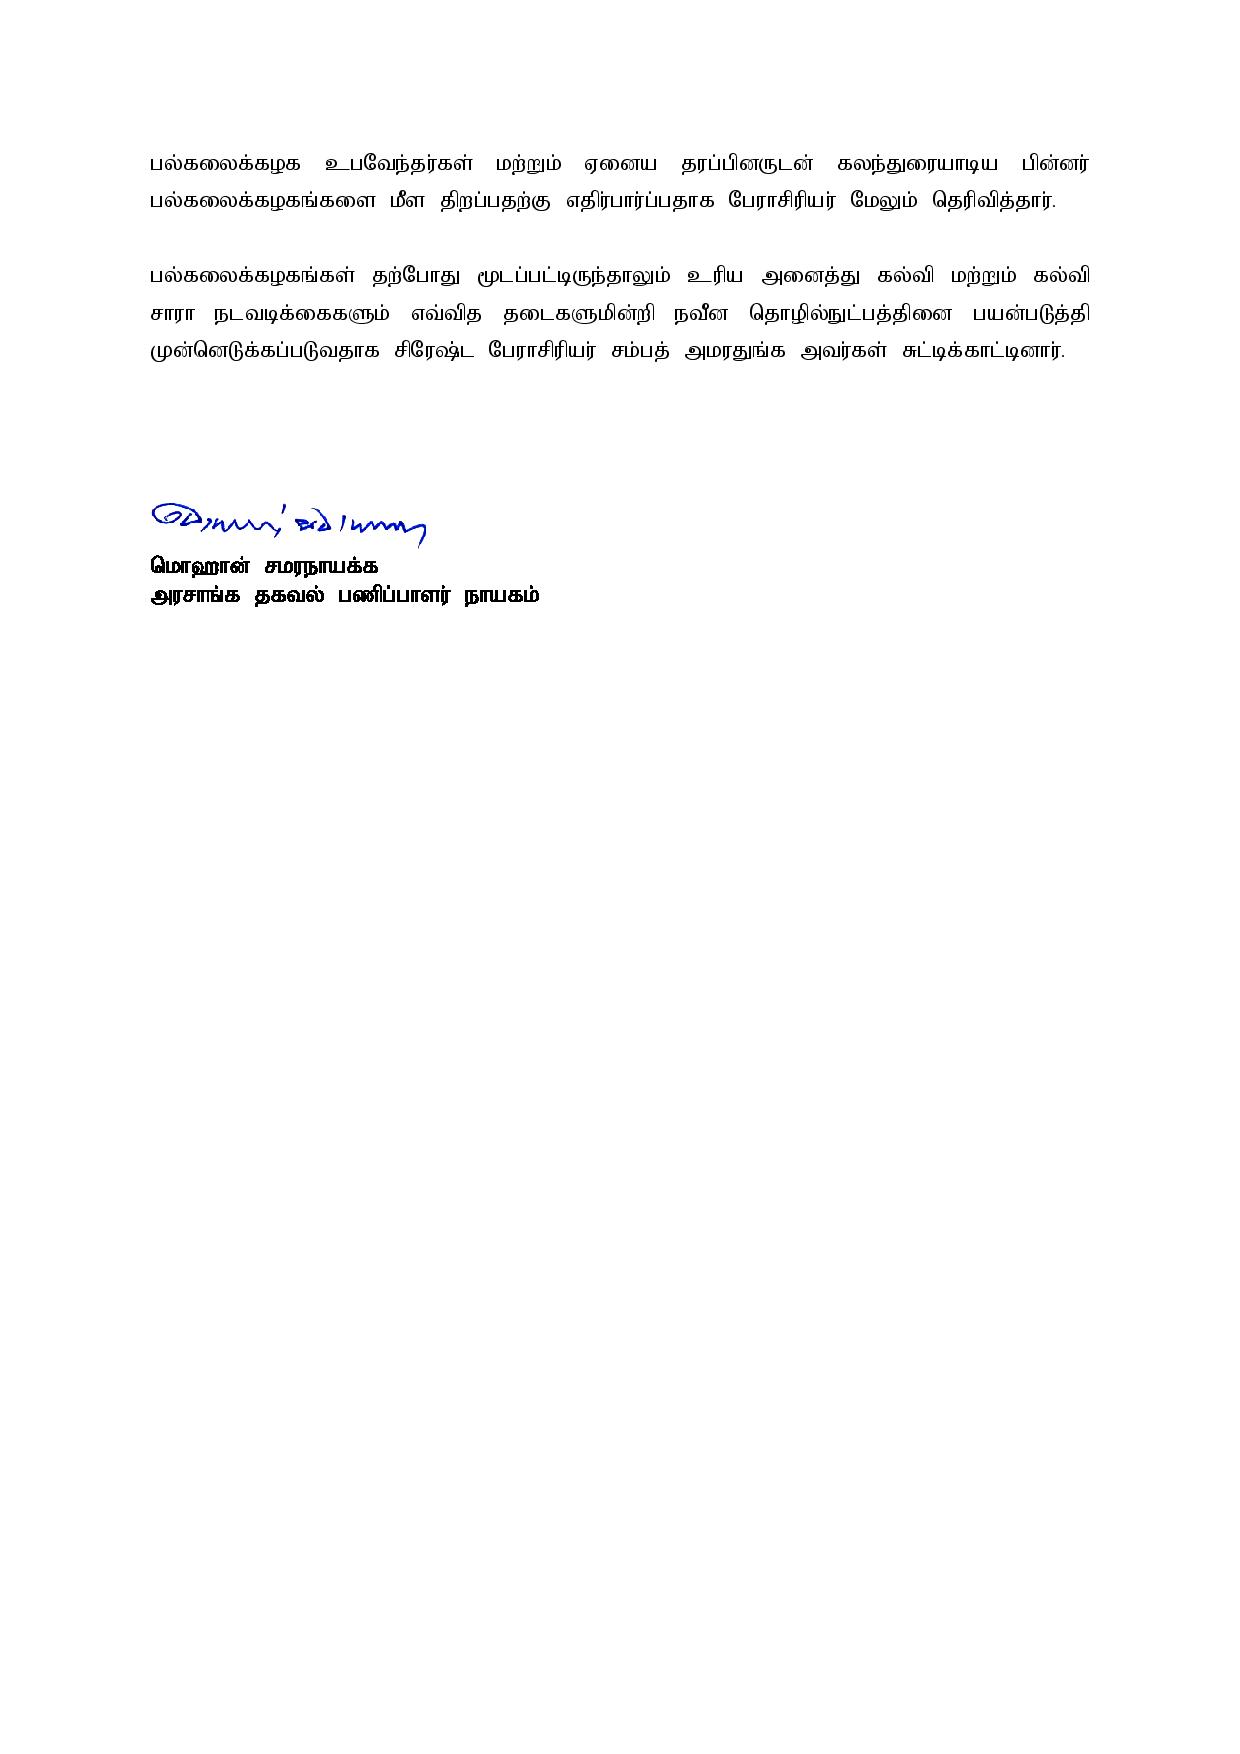 Press Release 950 Tamil page 002